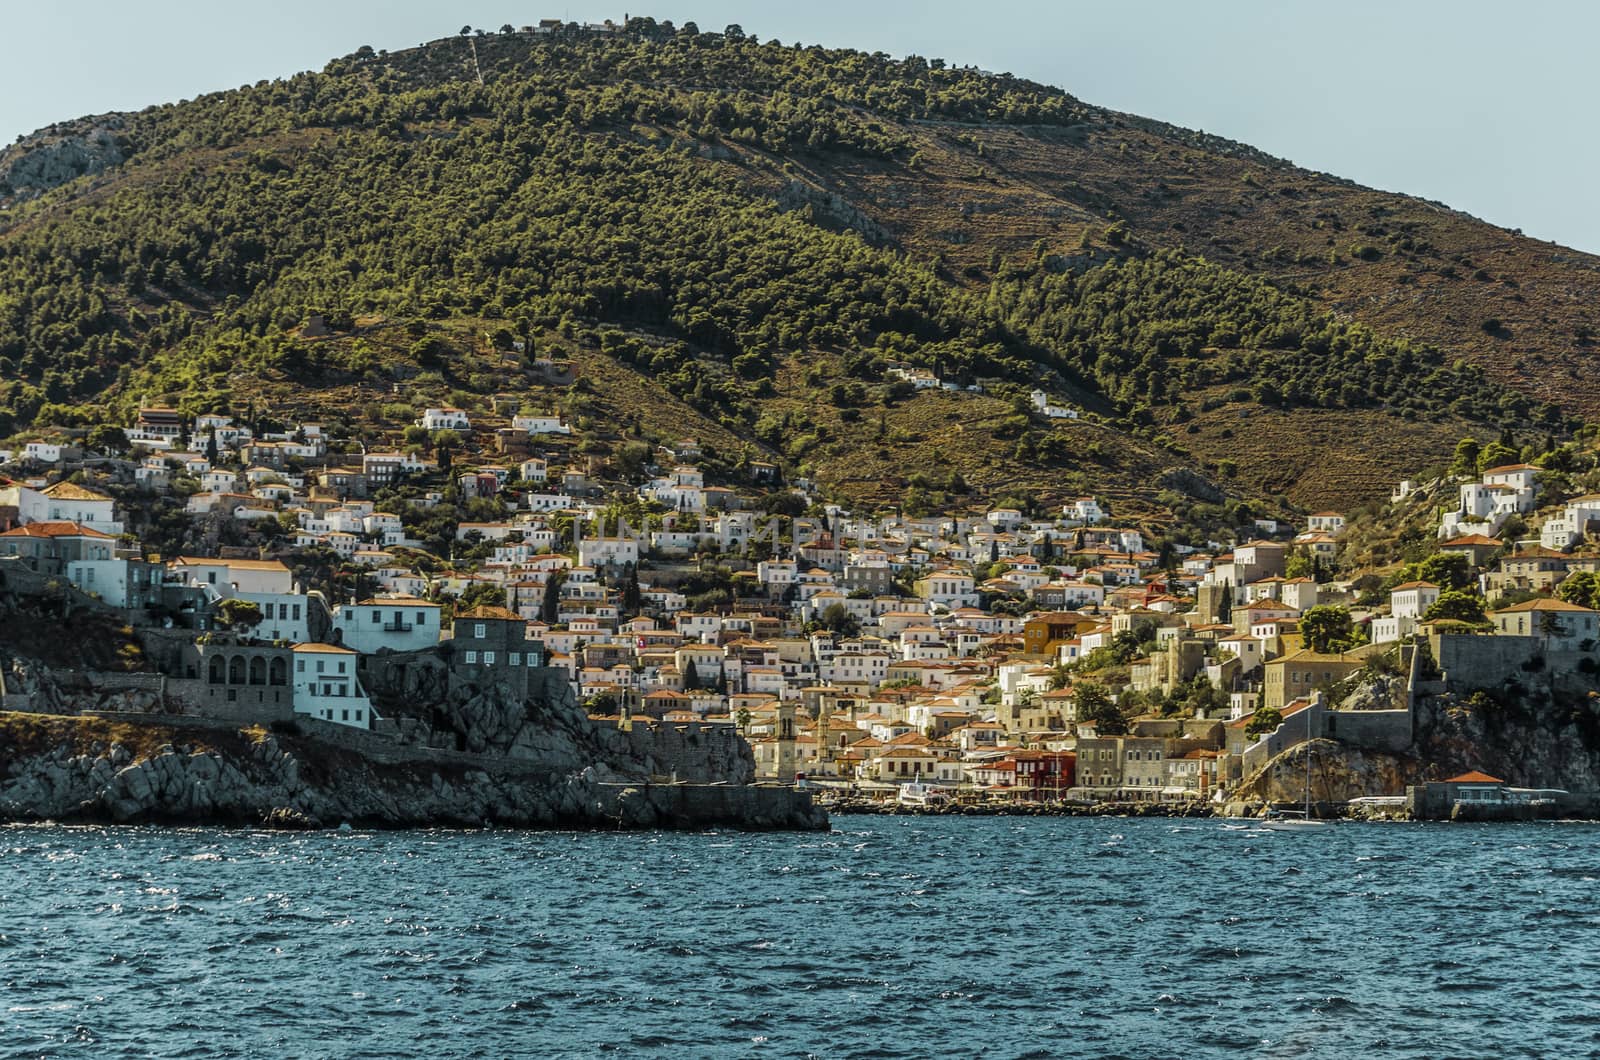 Saronic sea view of the panorama that we find when arriving at the port of the island of hydra with the entrance to it the city and the mountain in the background. Port that historically was fishing today lives of tourism.